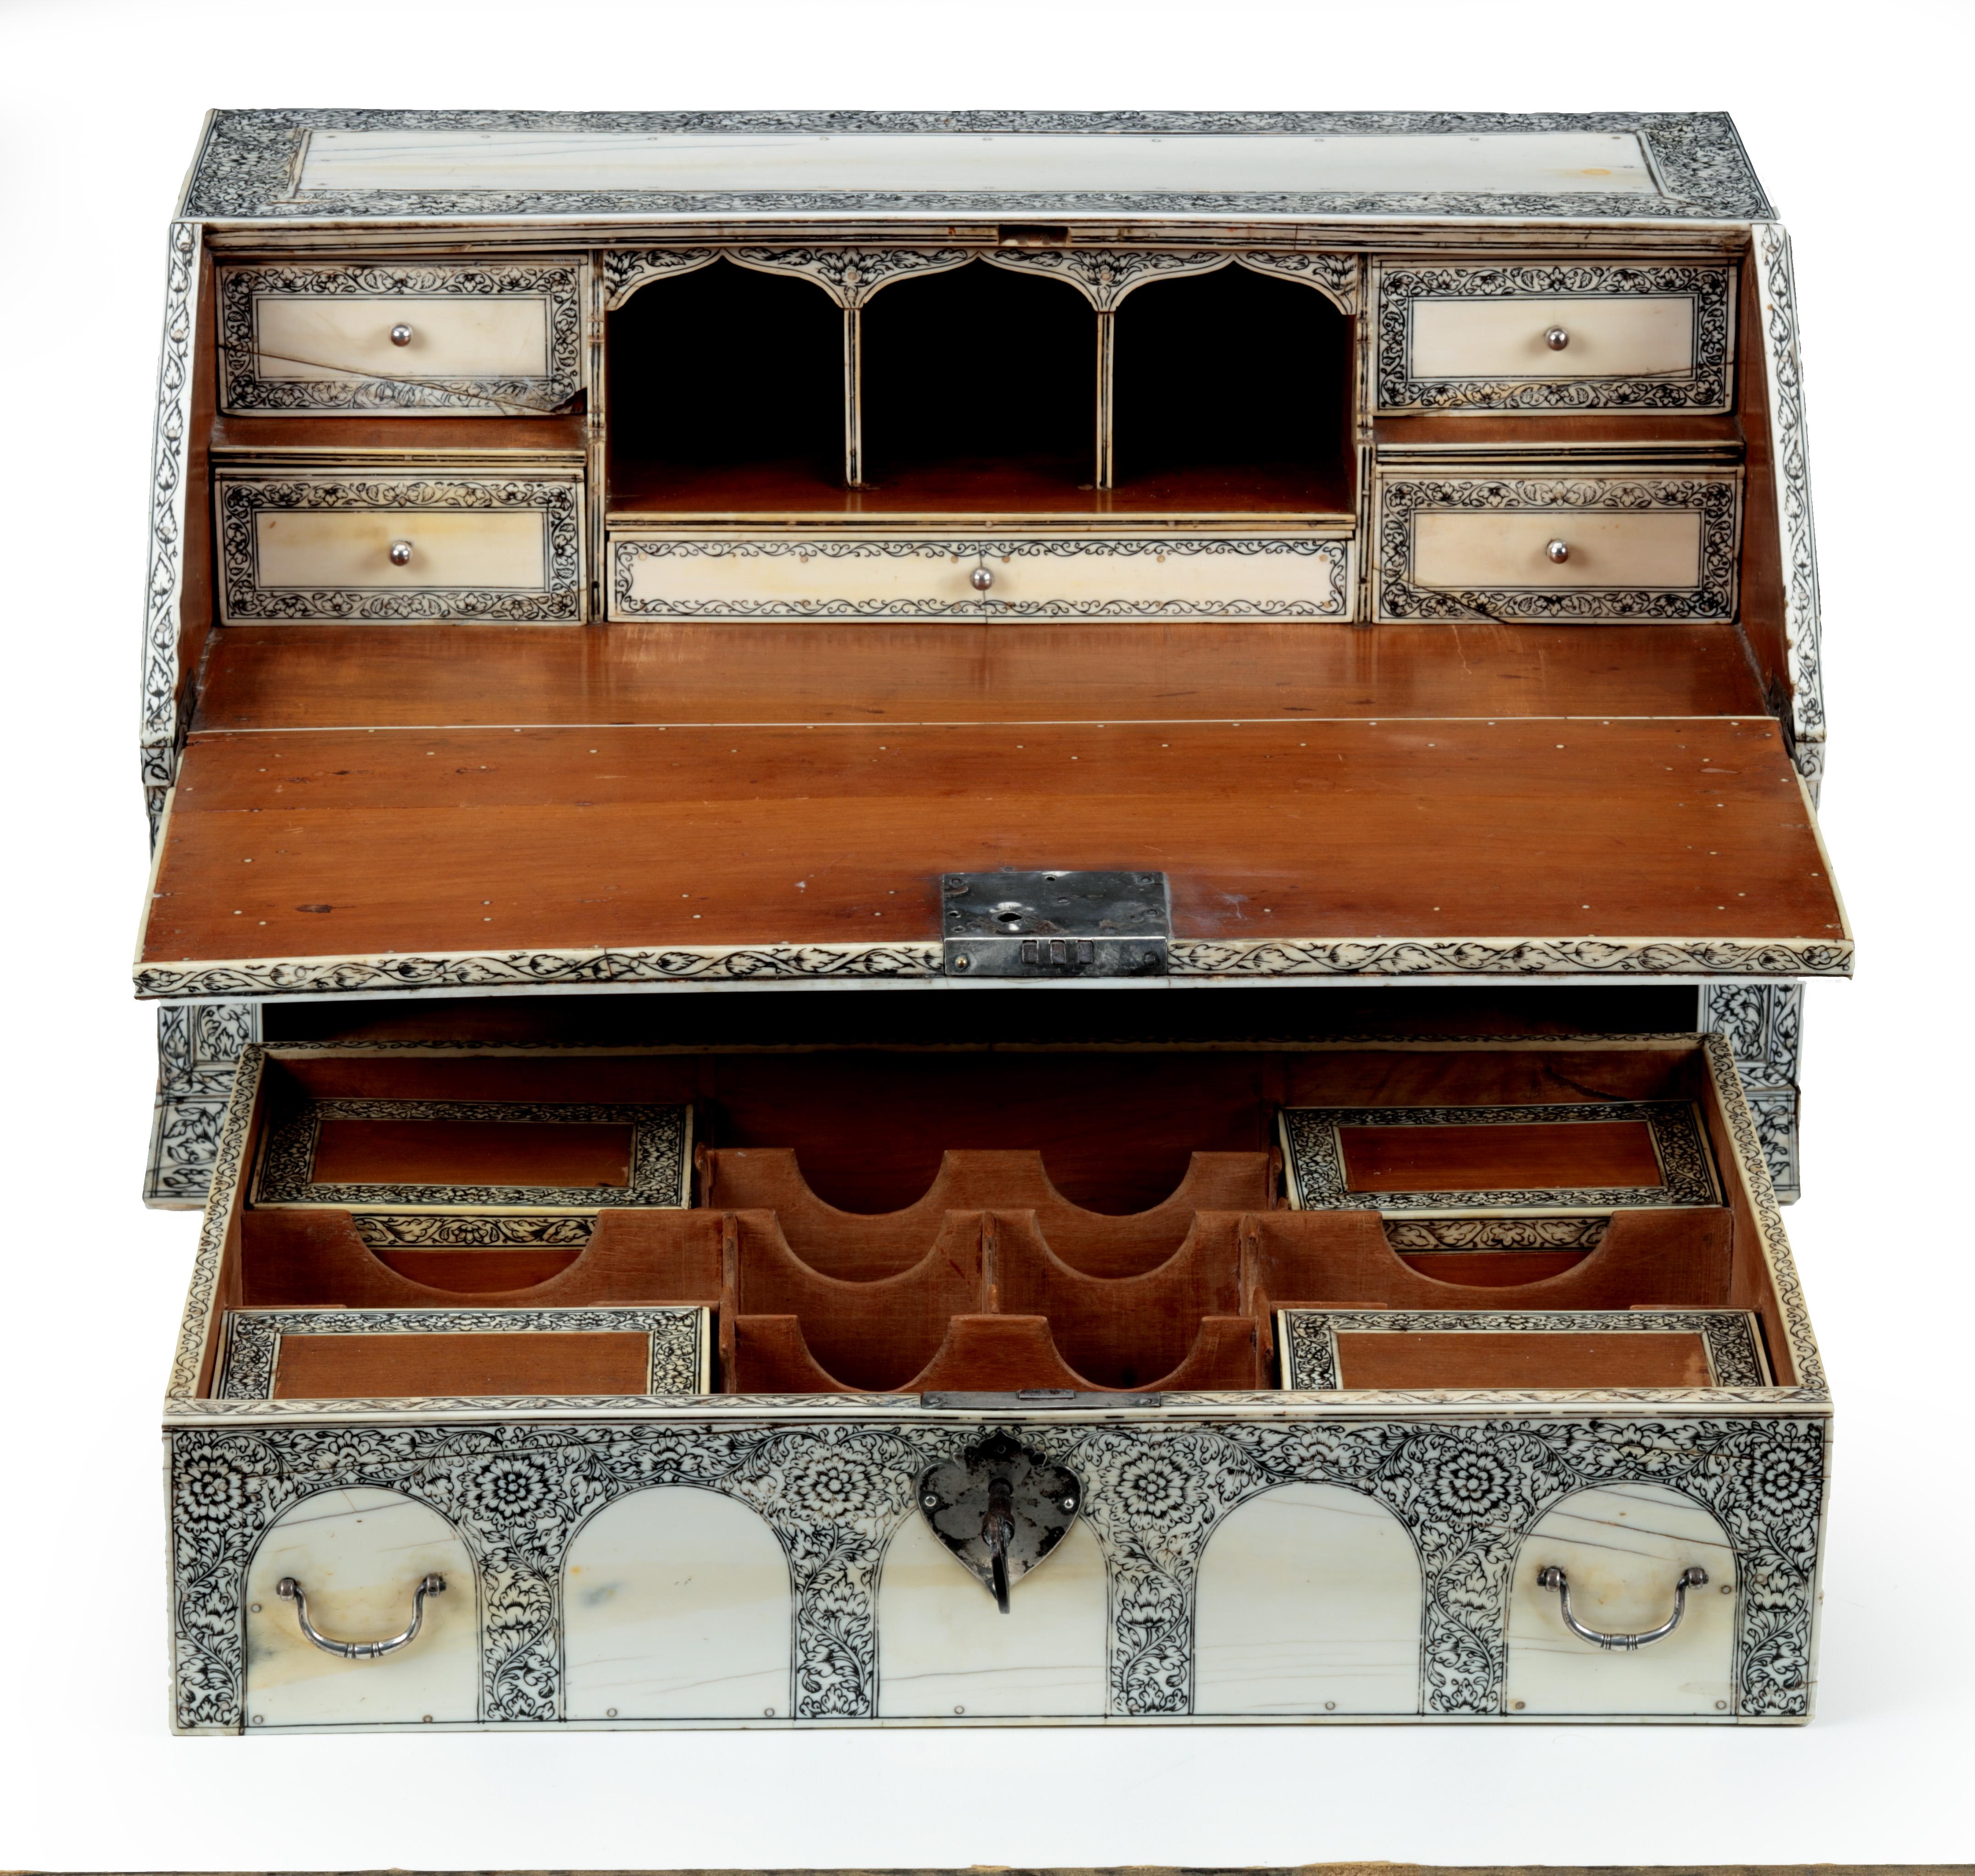 A Vizagapatam pen-engraved veneered sandalwood portable writing desk with silver mounts

India, Coromandel coast, Visakhapatnam, circa 1875

The writing desk with a large drawer under a sloping lid, which opens out into a writing surface,